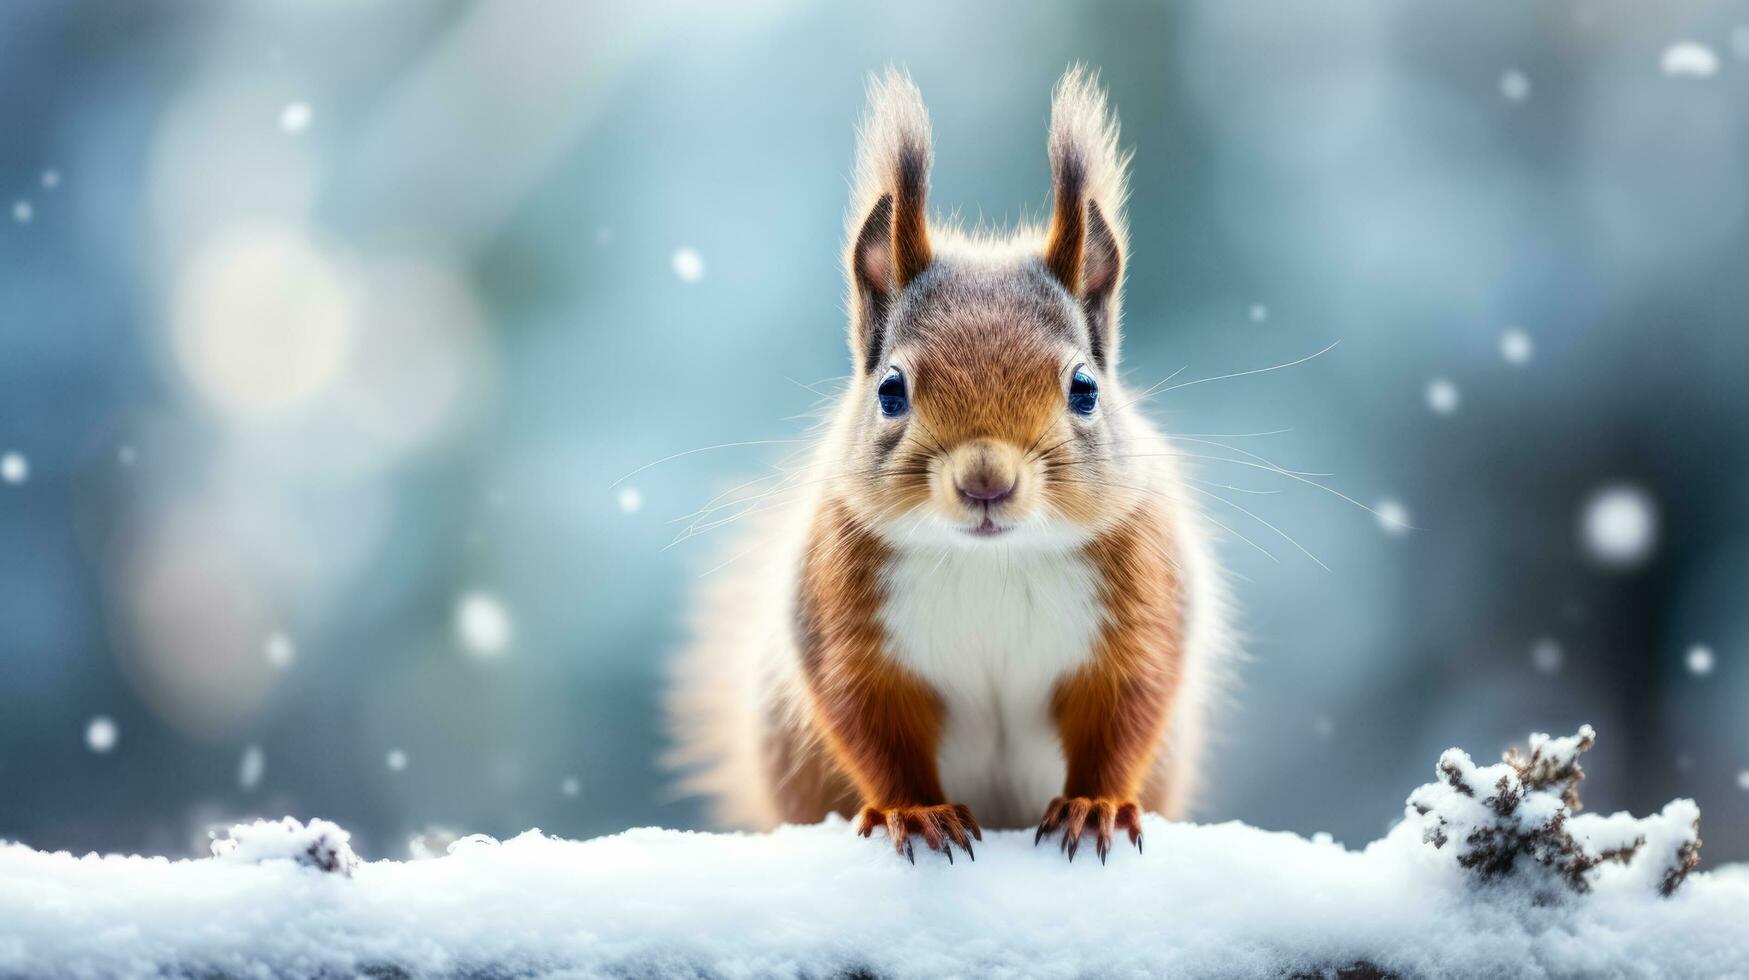 Squirrel on snow background with empty space for text photo